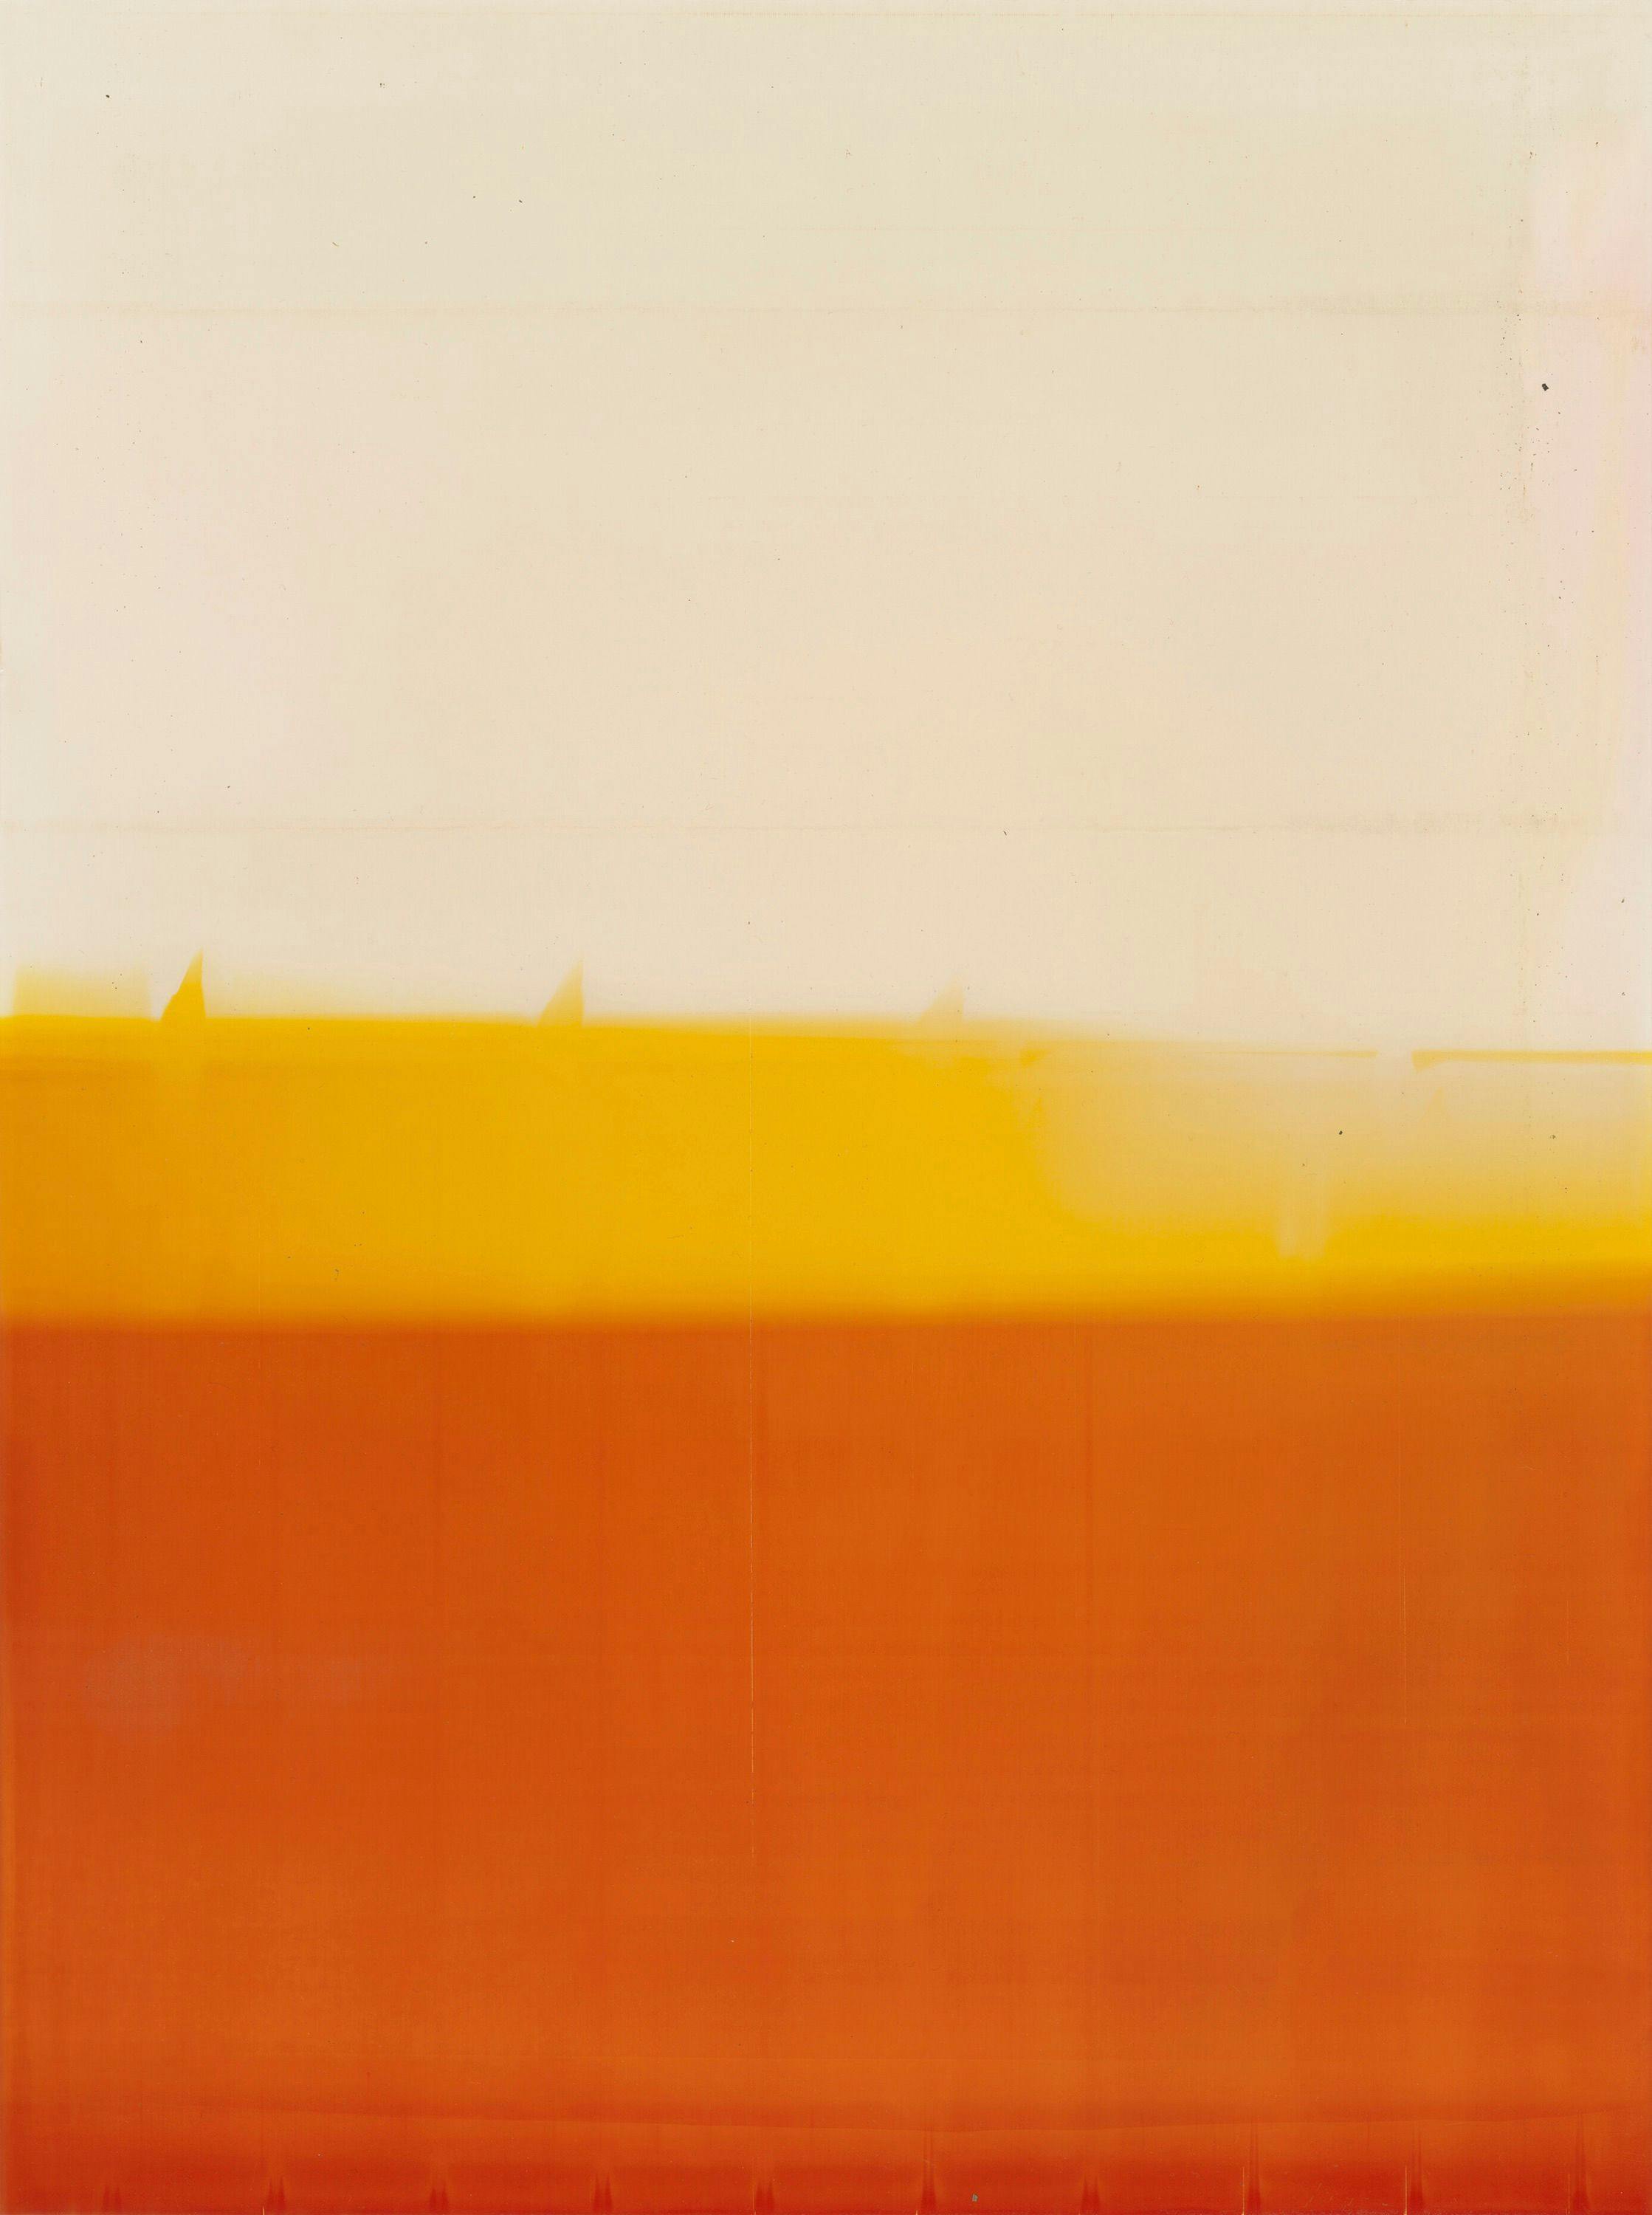 A photograph by Wolfgang Tillmans, titled Silver 221, dated 2007.